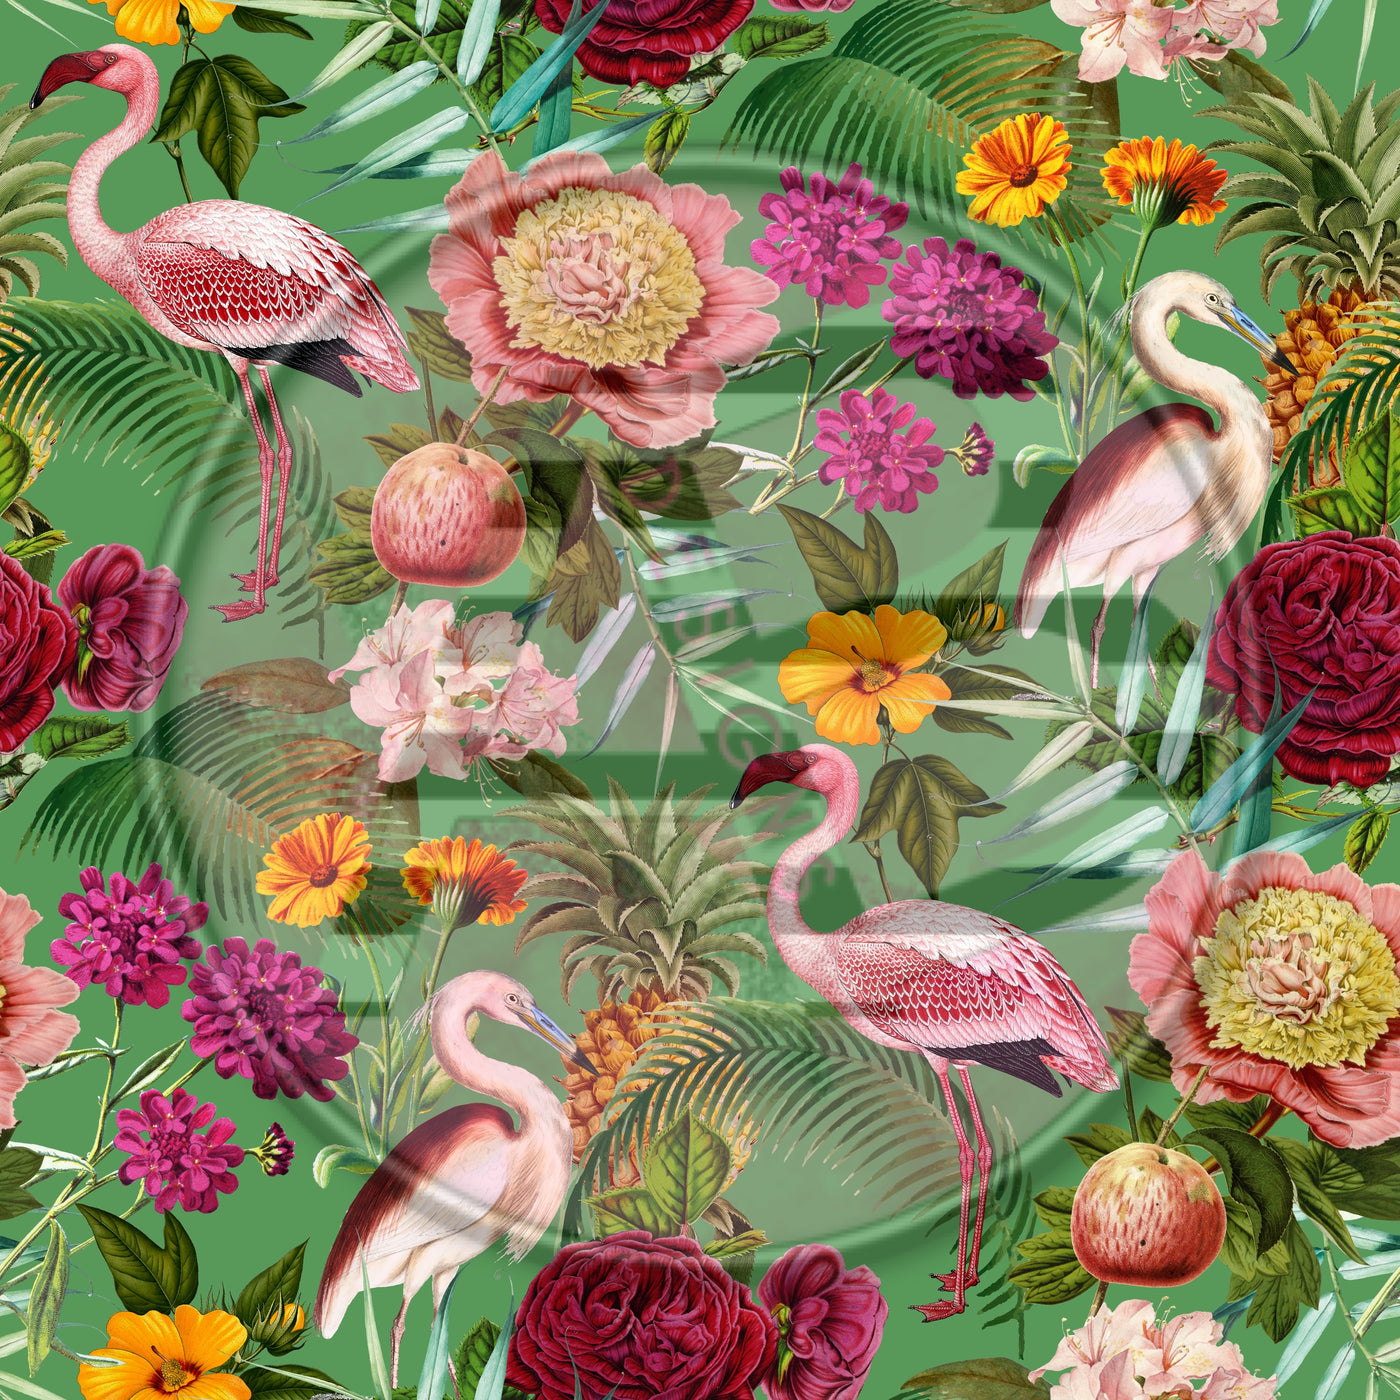 Adhesive Patterned Vinyl - Tropical 1773